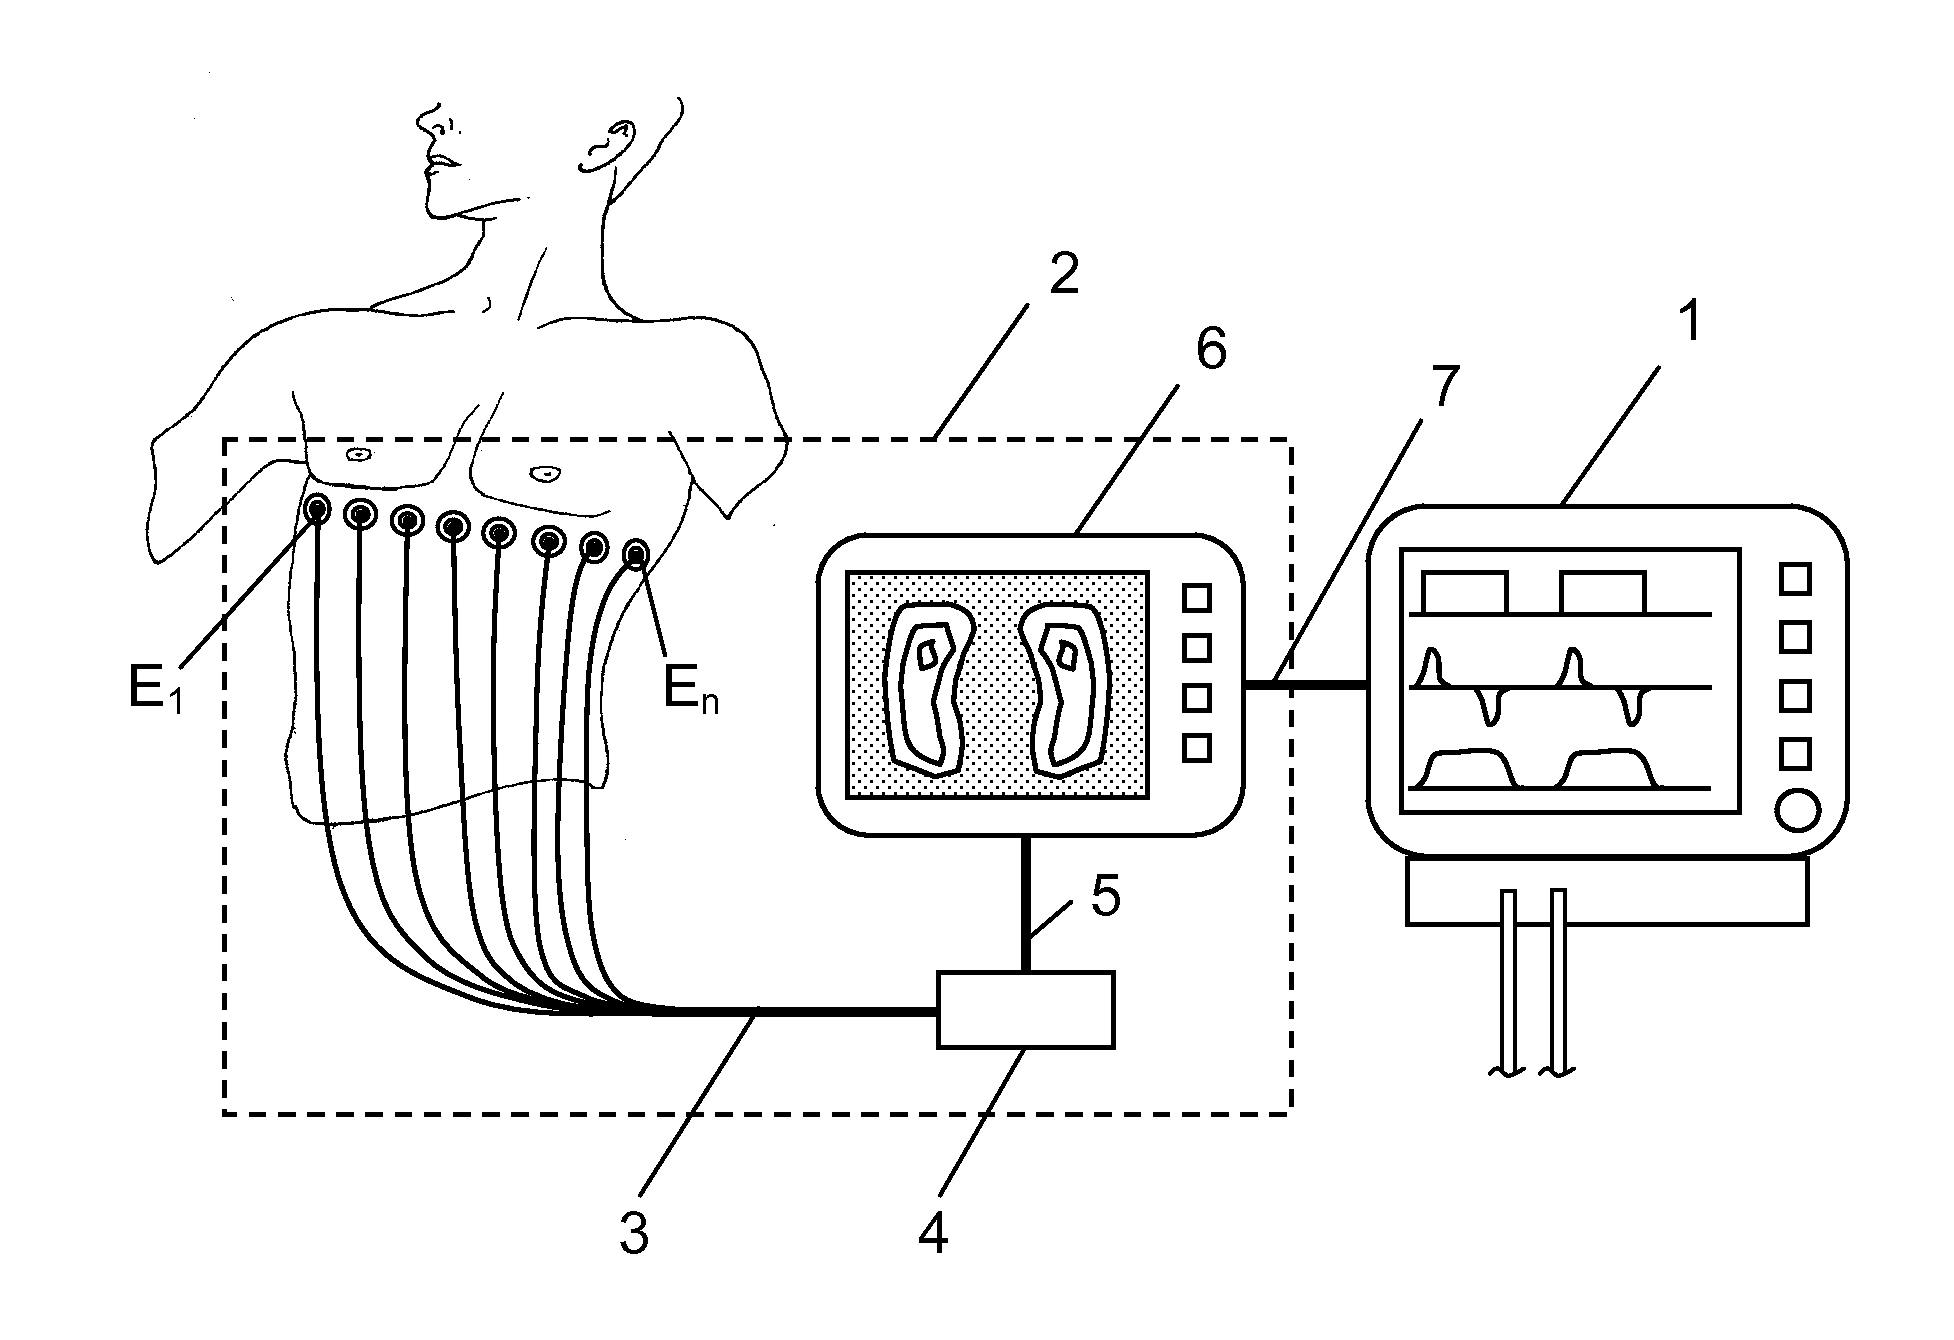 Apparatus and method to determine functional lung characteristics